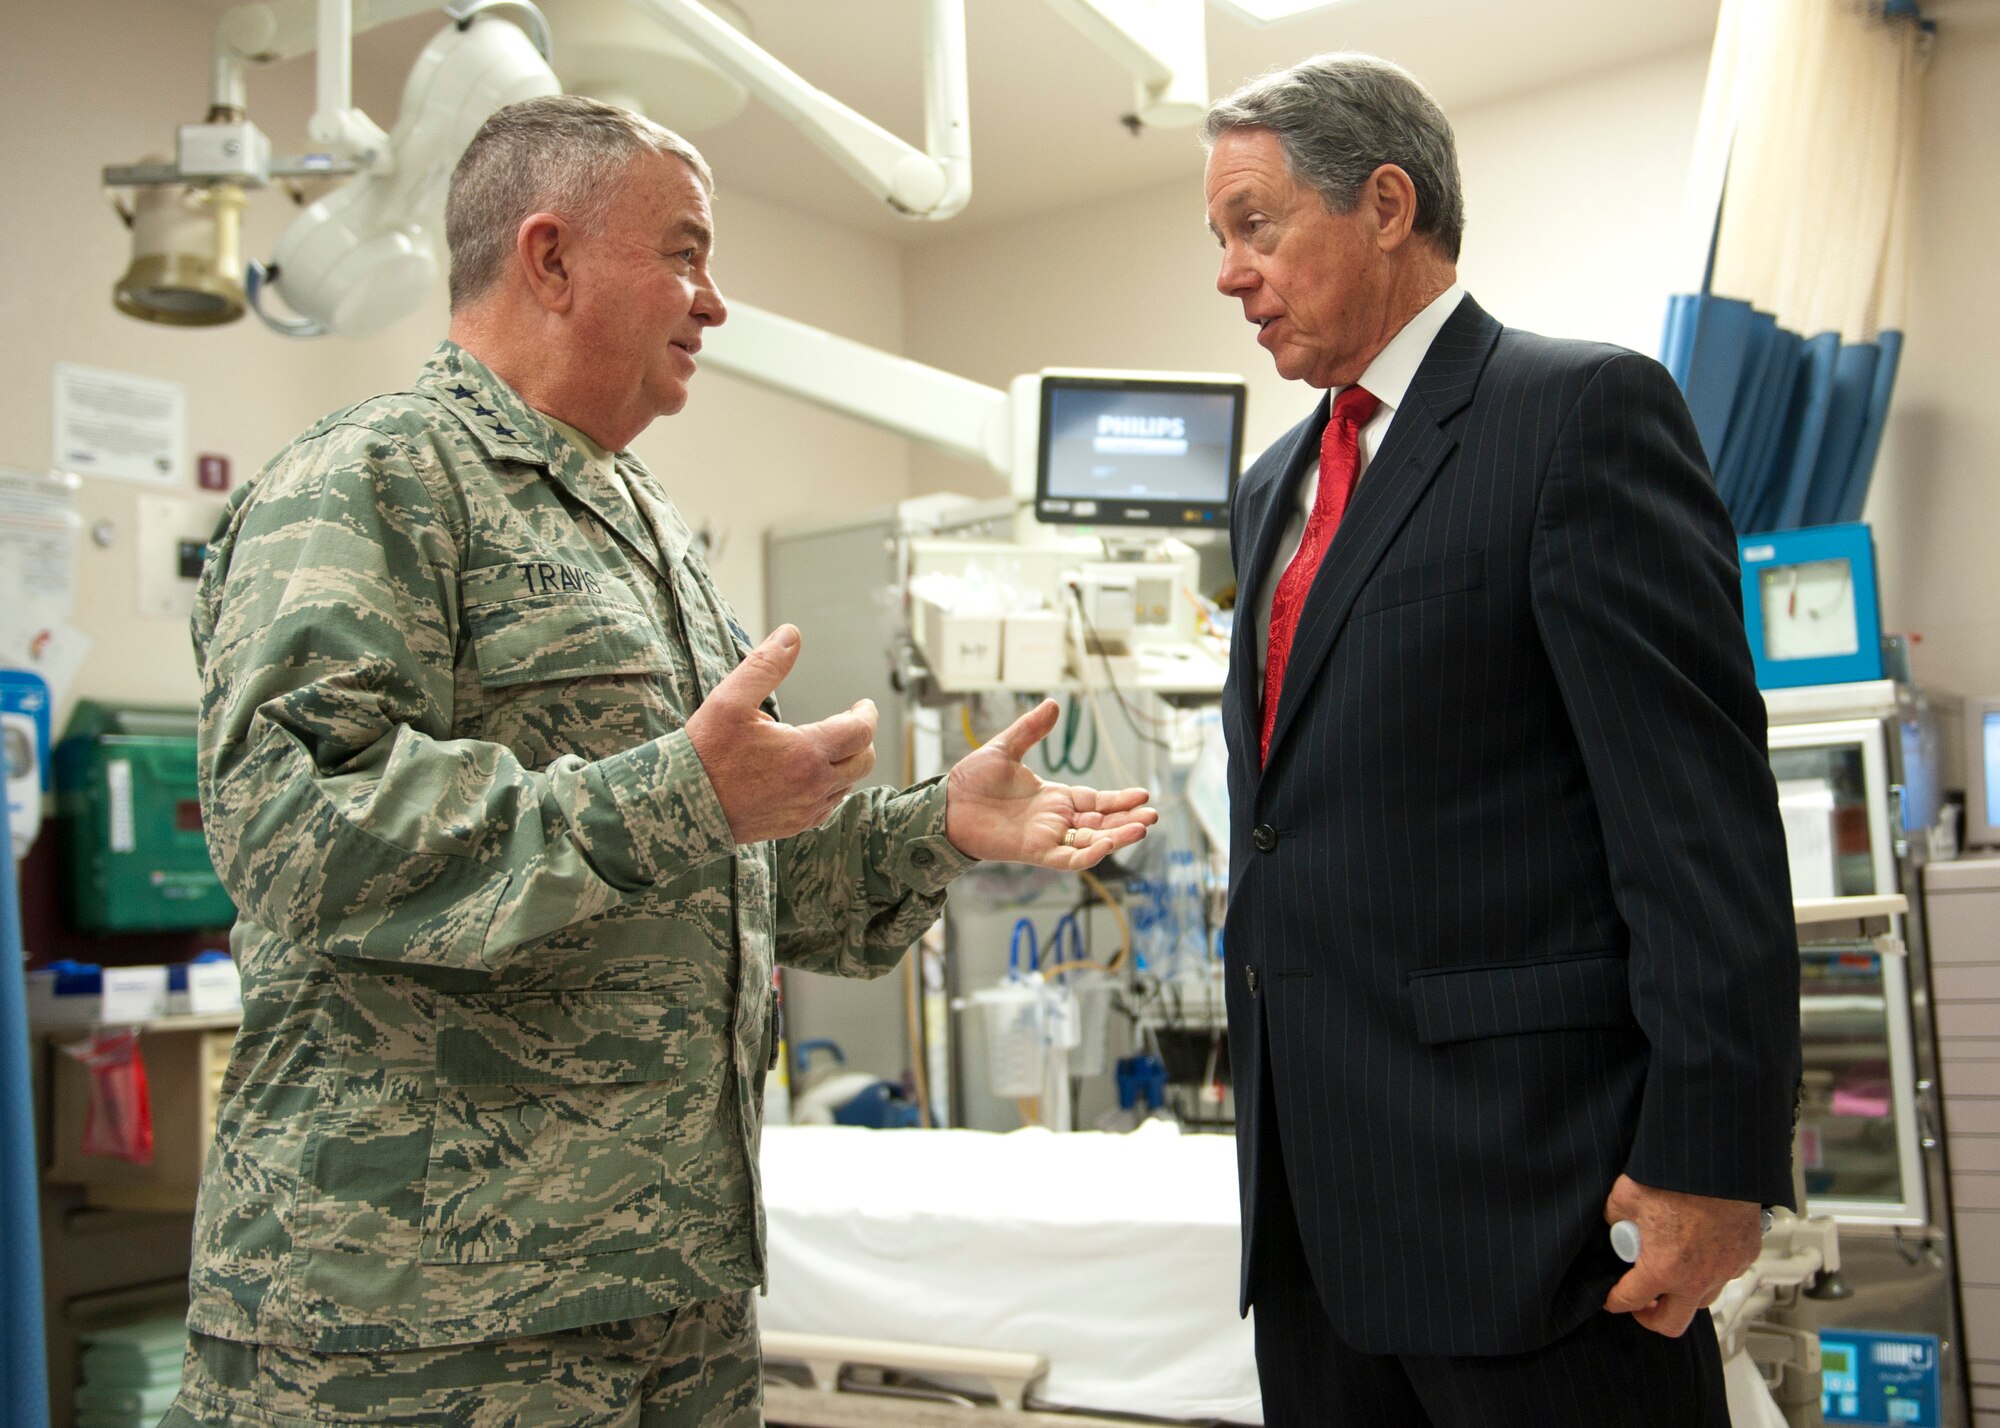 Lt. Gen. Thomas Travis, U.S. Air Force surgeon general, discusses the Sustained Medical and Readiness Trained, or SMART, program with John O’Reilly, University Medical Center of Southern Nevada chairman of the board, in the hospital’s emergency room, Las Vegas, Nev., Jan. 13, 2015. The SMART program allows Air Force physicians, nurses and medical technicians the opportunity to hone their skills in a civilian hospital where they have the potential to see more trauma patients than they would in a military treatment facility. (U.S. Air Force photo by Senior Airman Thomas Spangler)